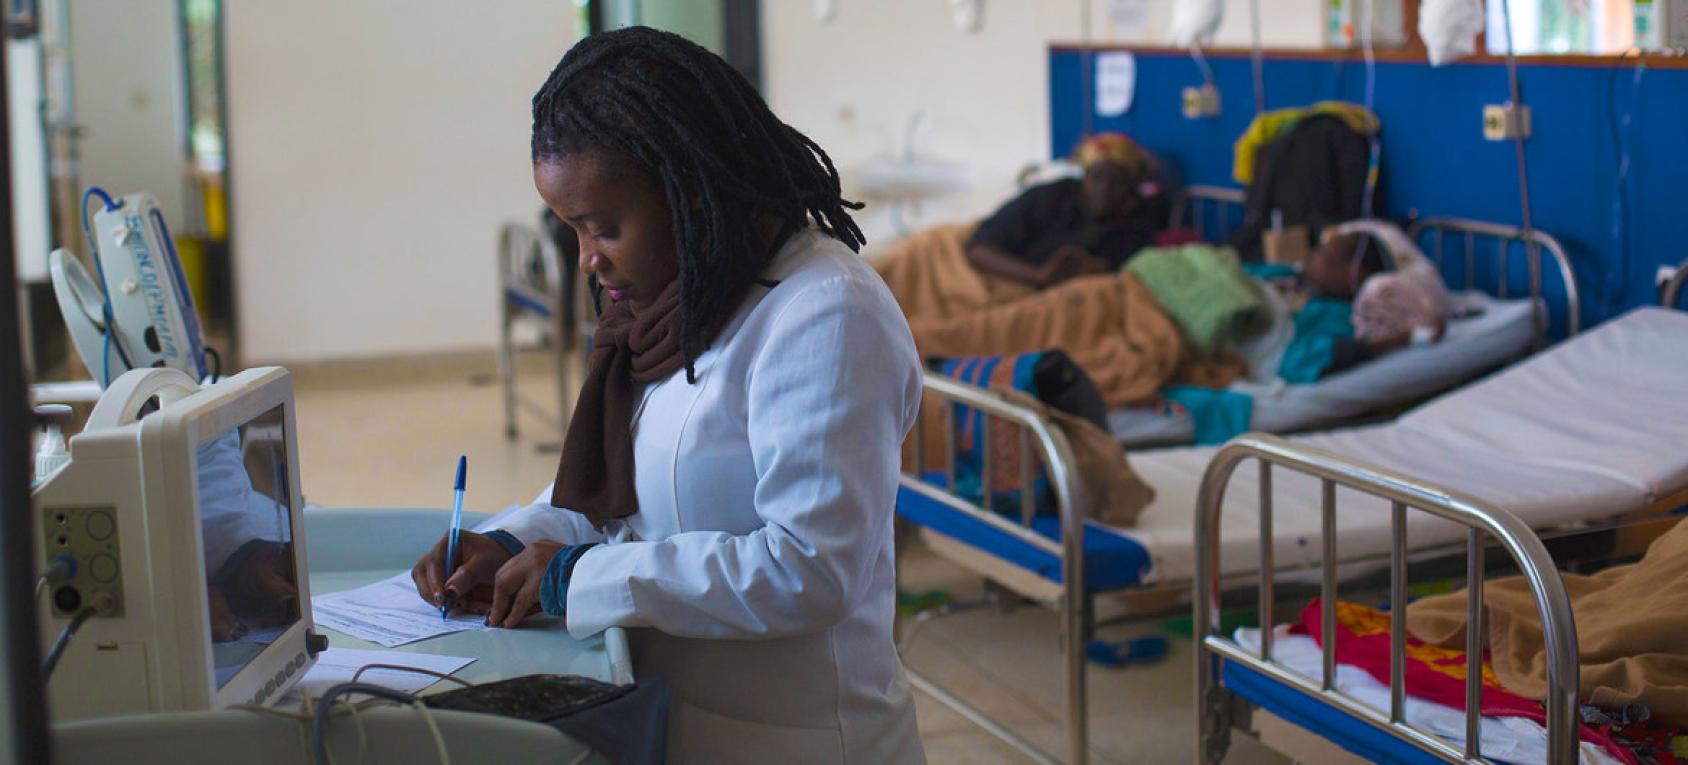 A nurse writes on a form as she stands by a computer desk with patients in beds in the background.